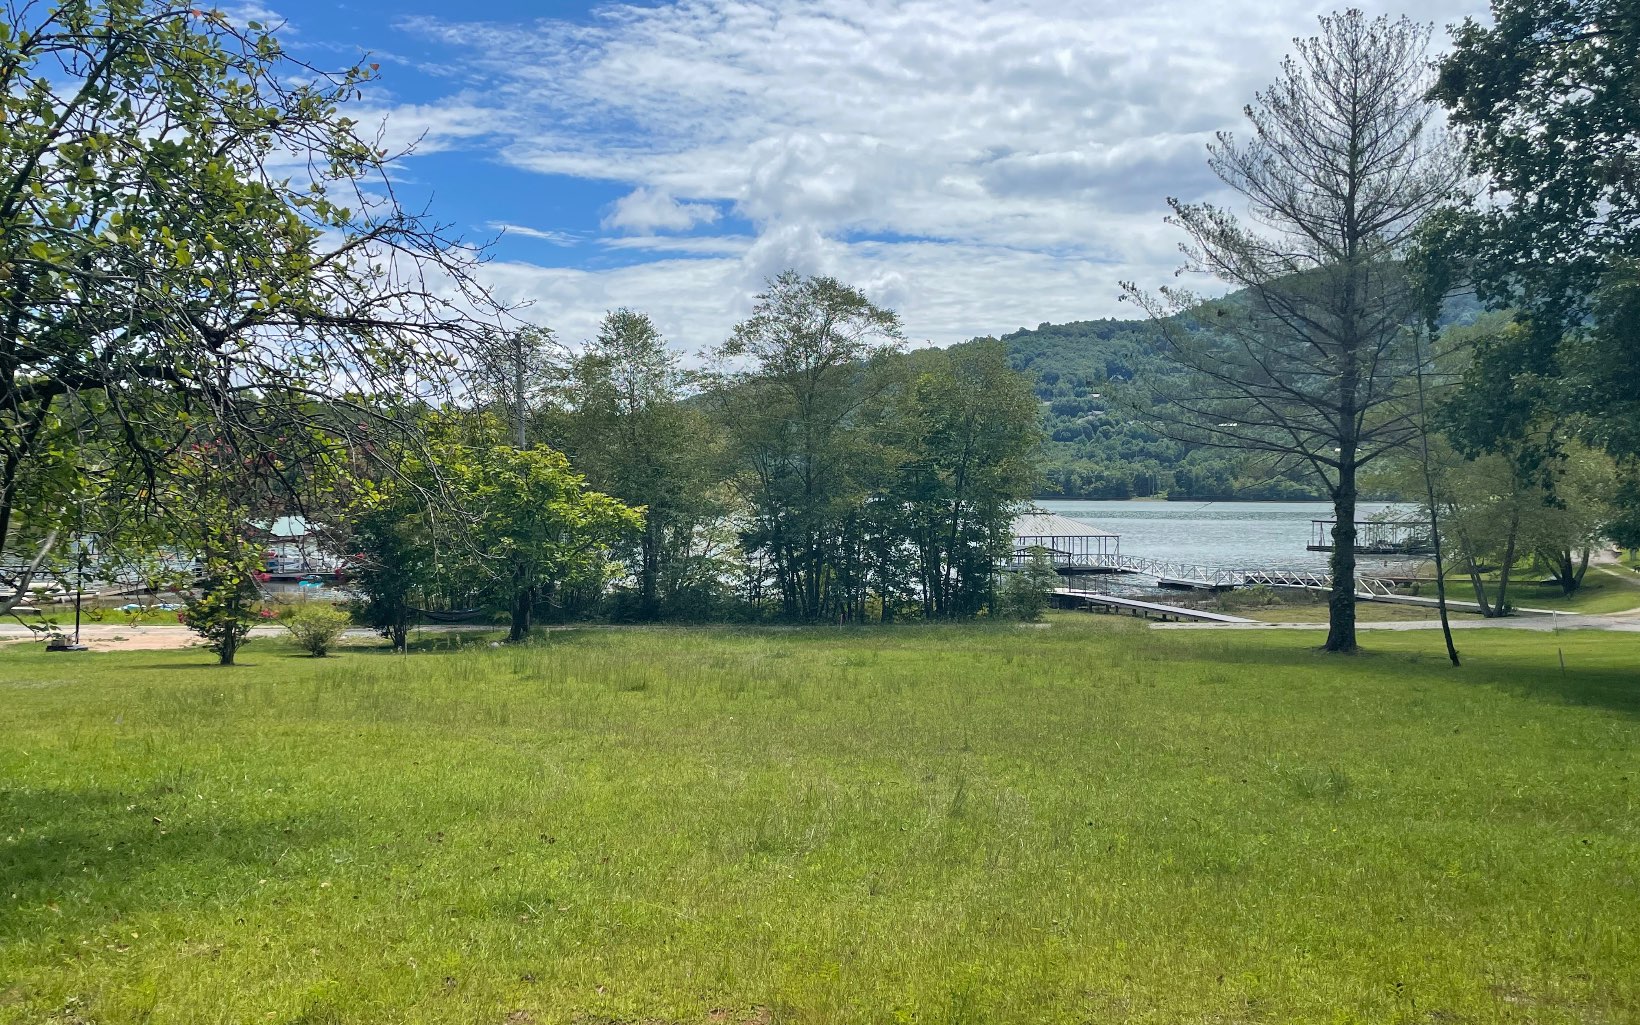 LOCATION LOCATION LOCATION!!! 0.56 acre gentle lot with year round views of gorgeous Lake Chatuge! Lot actually fronts the 1933' lake contour. Easy access, paved road. County water available but has private well in place. Septic is also in place. UNRESTRICTED -- bring your RV/camper/tiny home or build a barndominium! New survey just completed. Within walking distance to the USFS that connects to Lake Chatuge! Less than 1/4 mile to public boat ramp, marina and boat rentals! 10 mins to the quaint town of Hiawassee, Ga with restaurants, shopping, & medical facilities. The Appalachian Trail also goes through the county, and many other hiking trails and waterfalls!